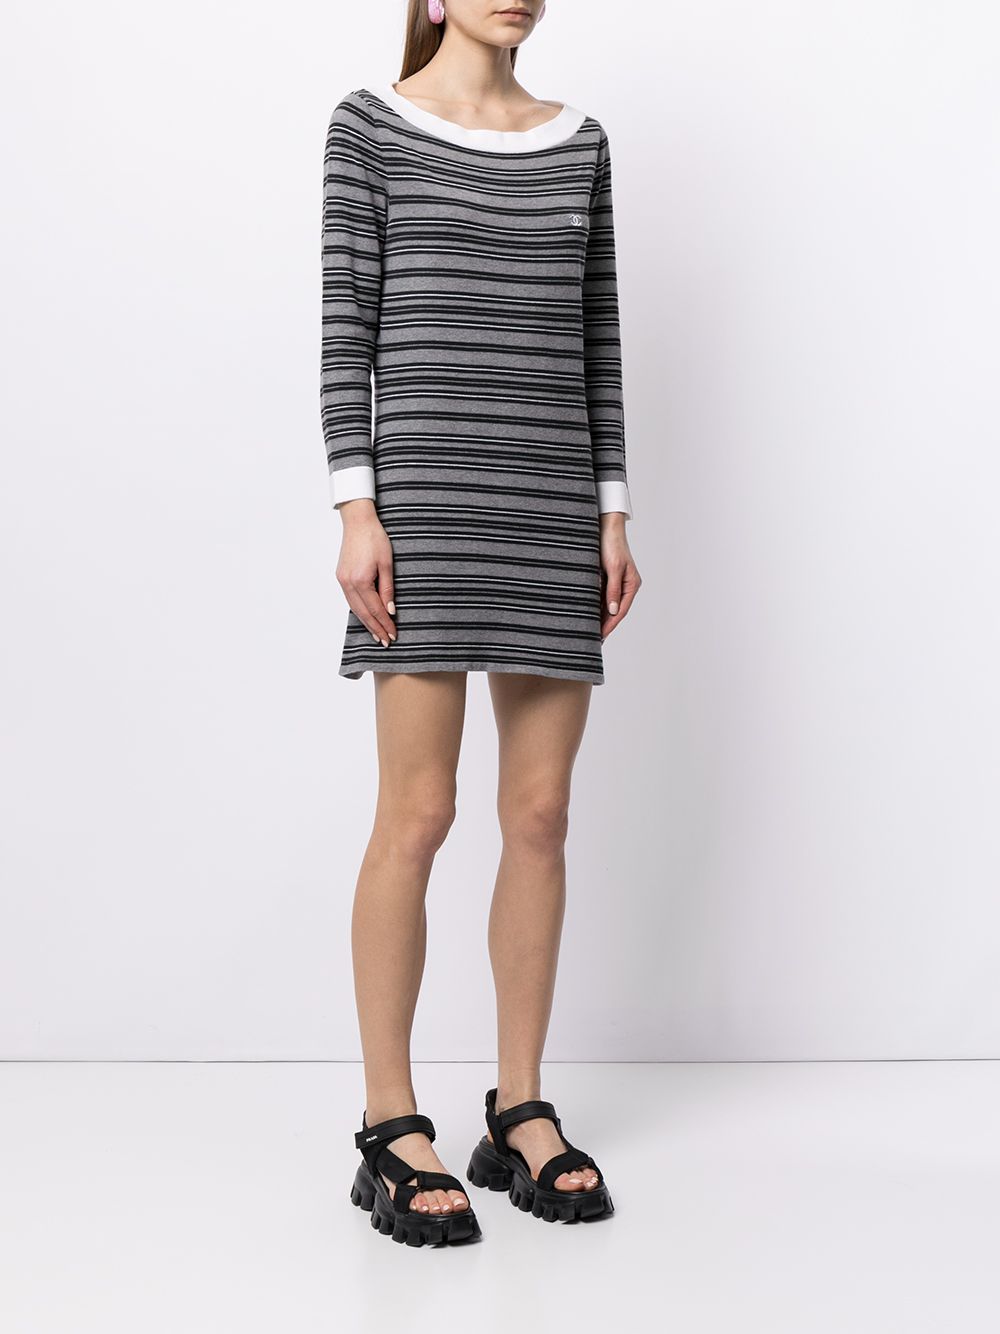 CHANEL Pre-Owned 2007 long-sleeved Striped Minidress - Farfetch